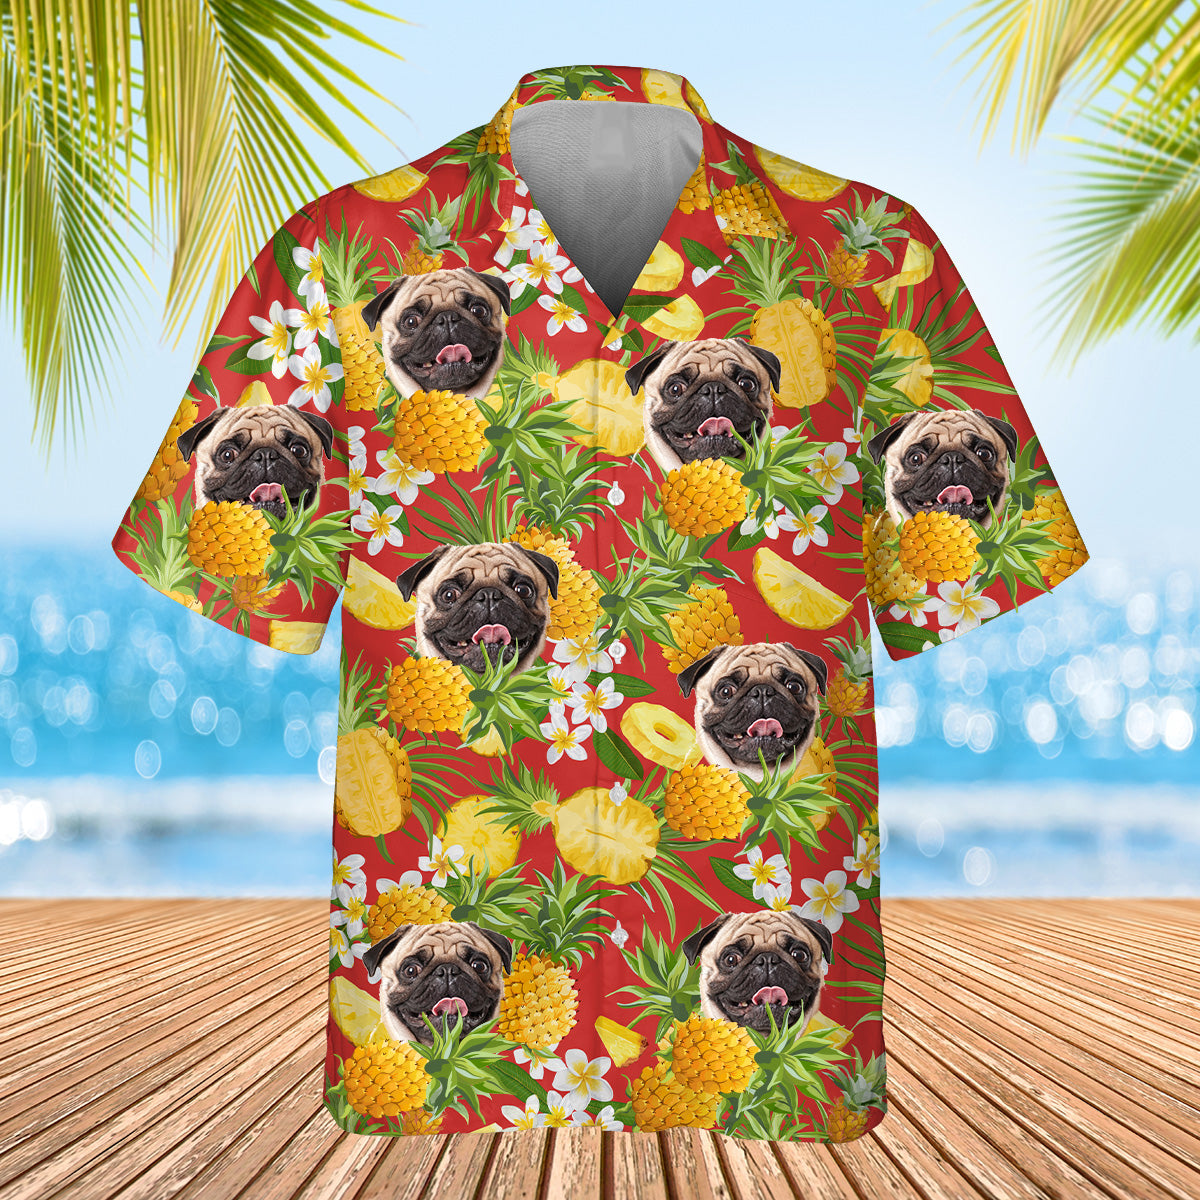 red pineapple themed shirt with dogs